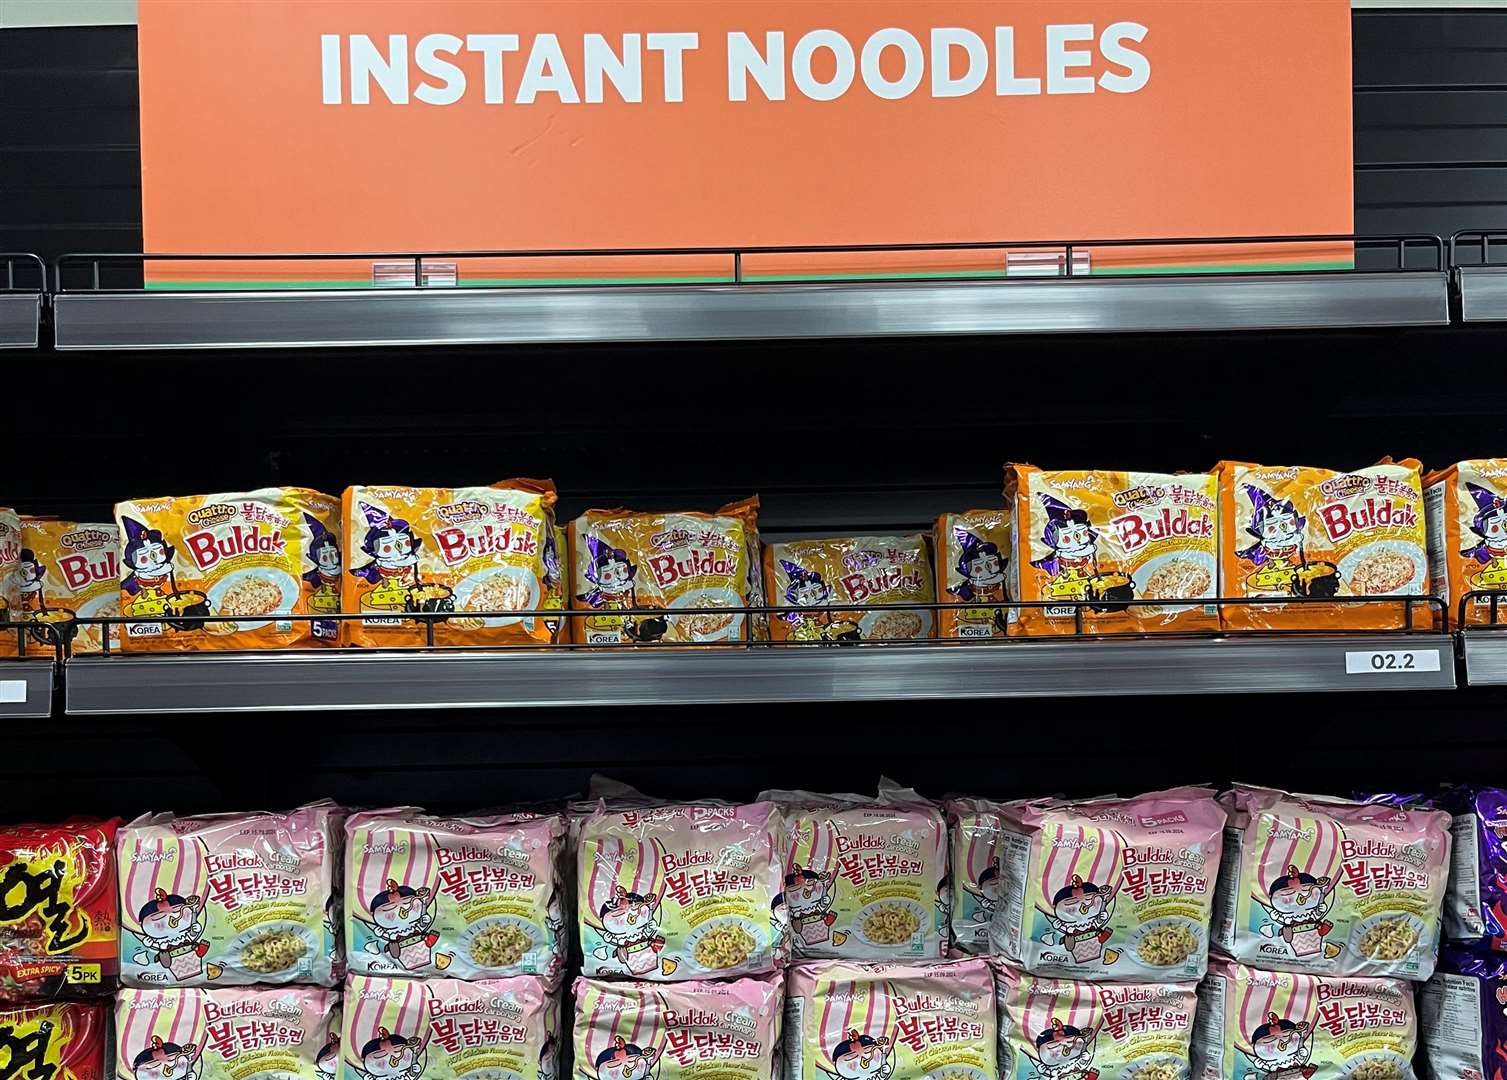 The store has many different kinds of noodles